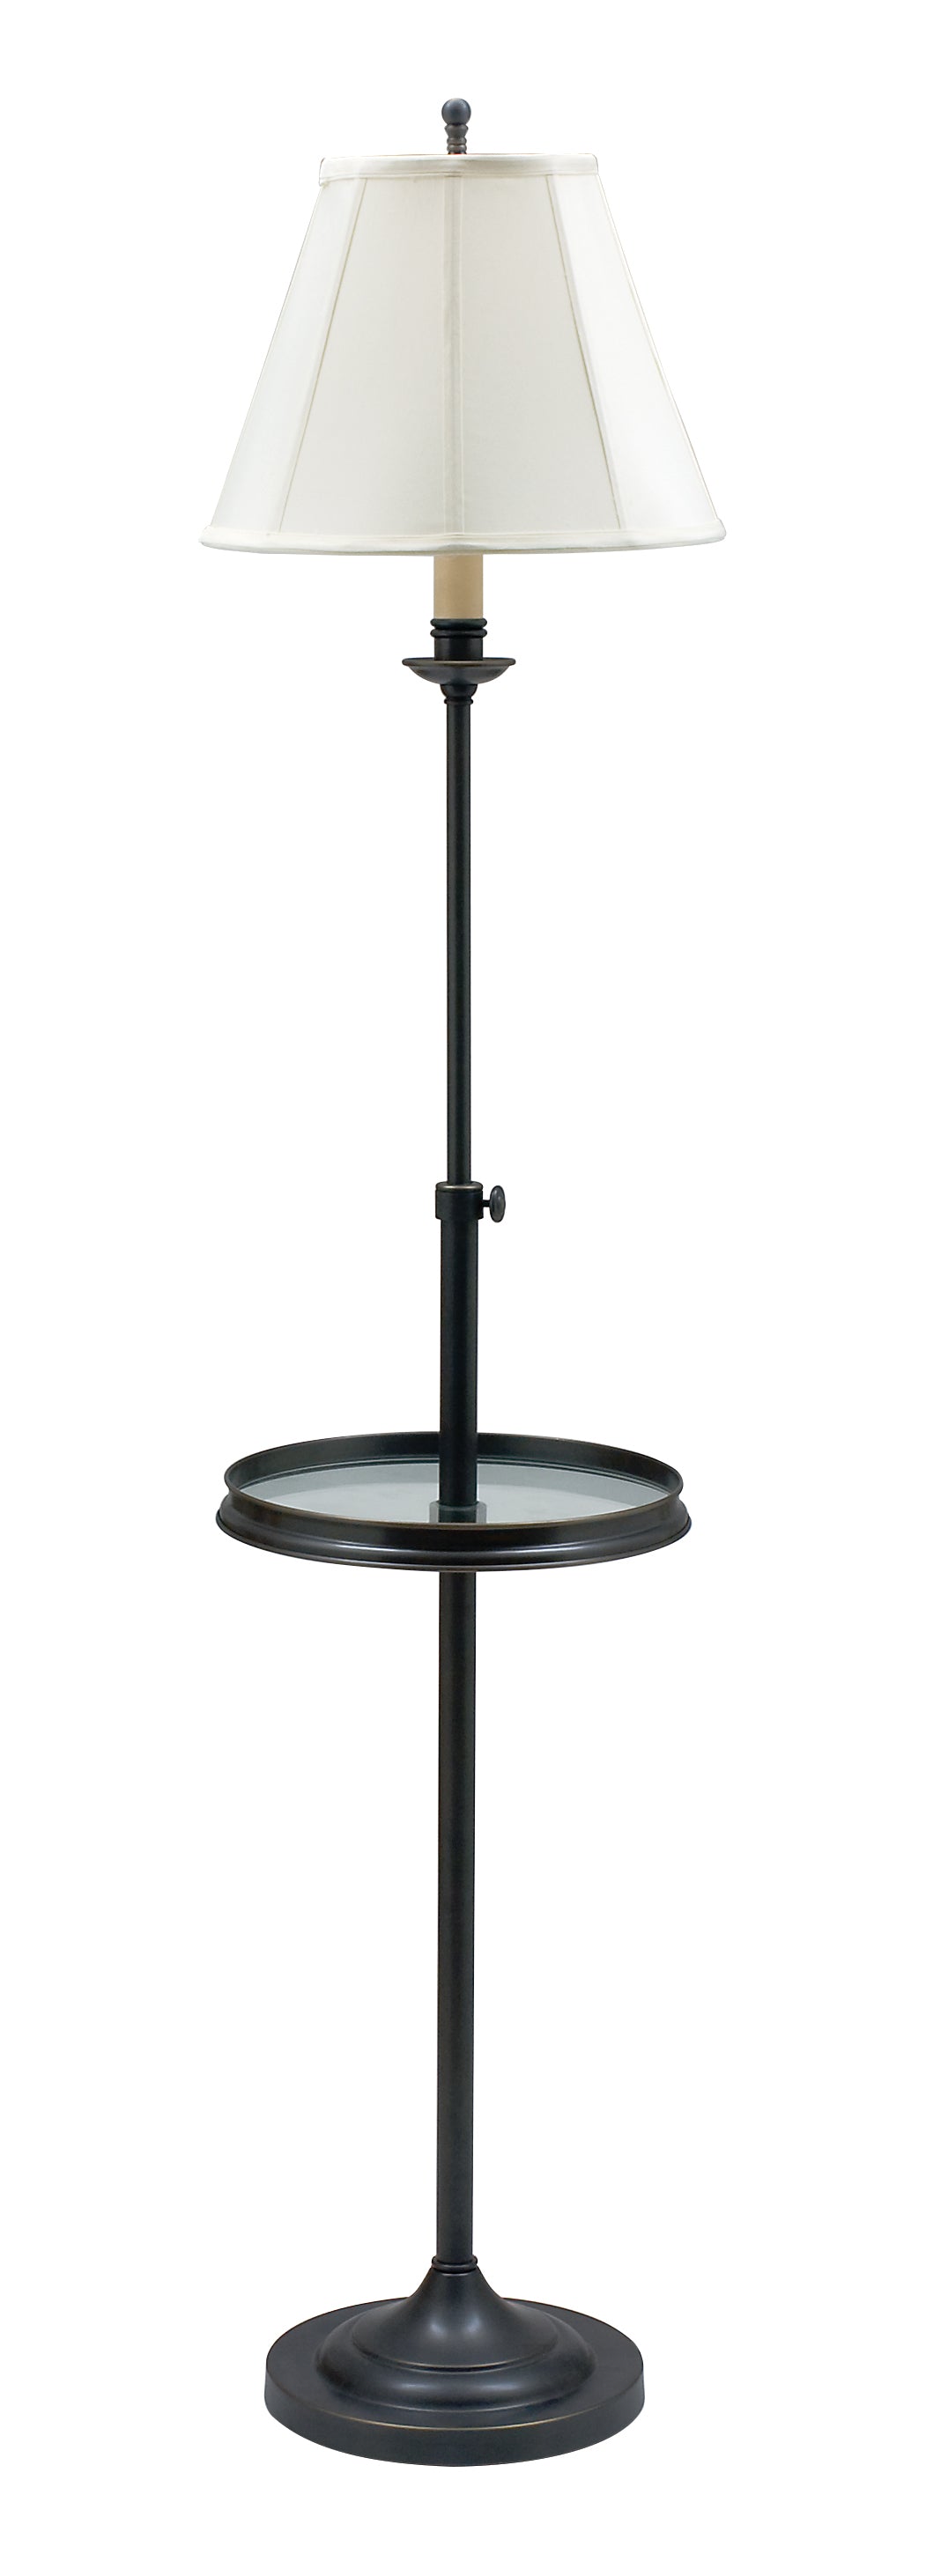 House of Troy Club Adjustable Oil Rubbed Bronze Floor Lamp Glass Table CL202-OB